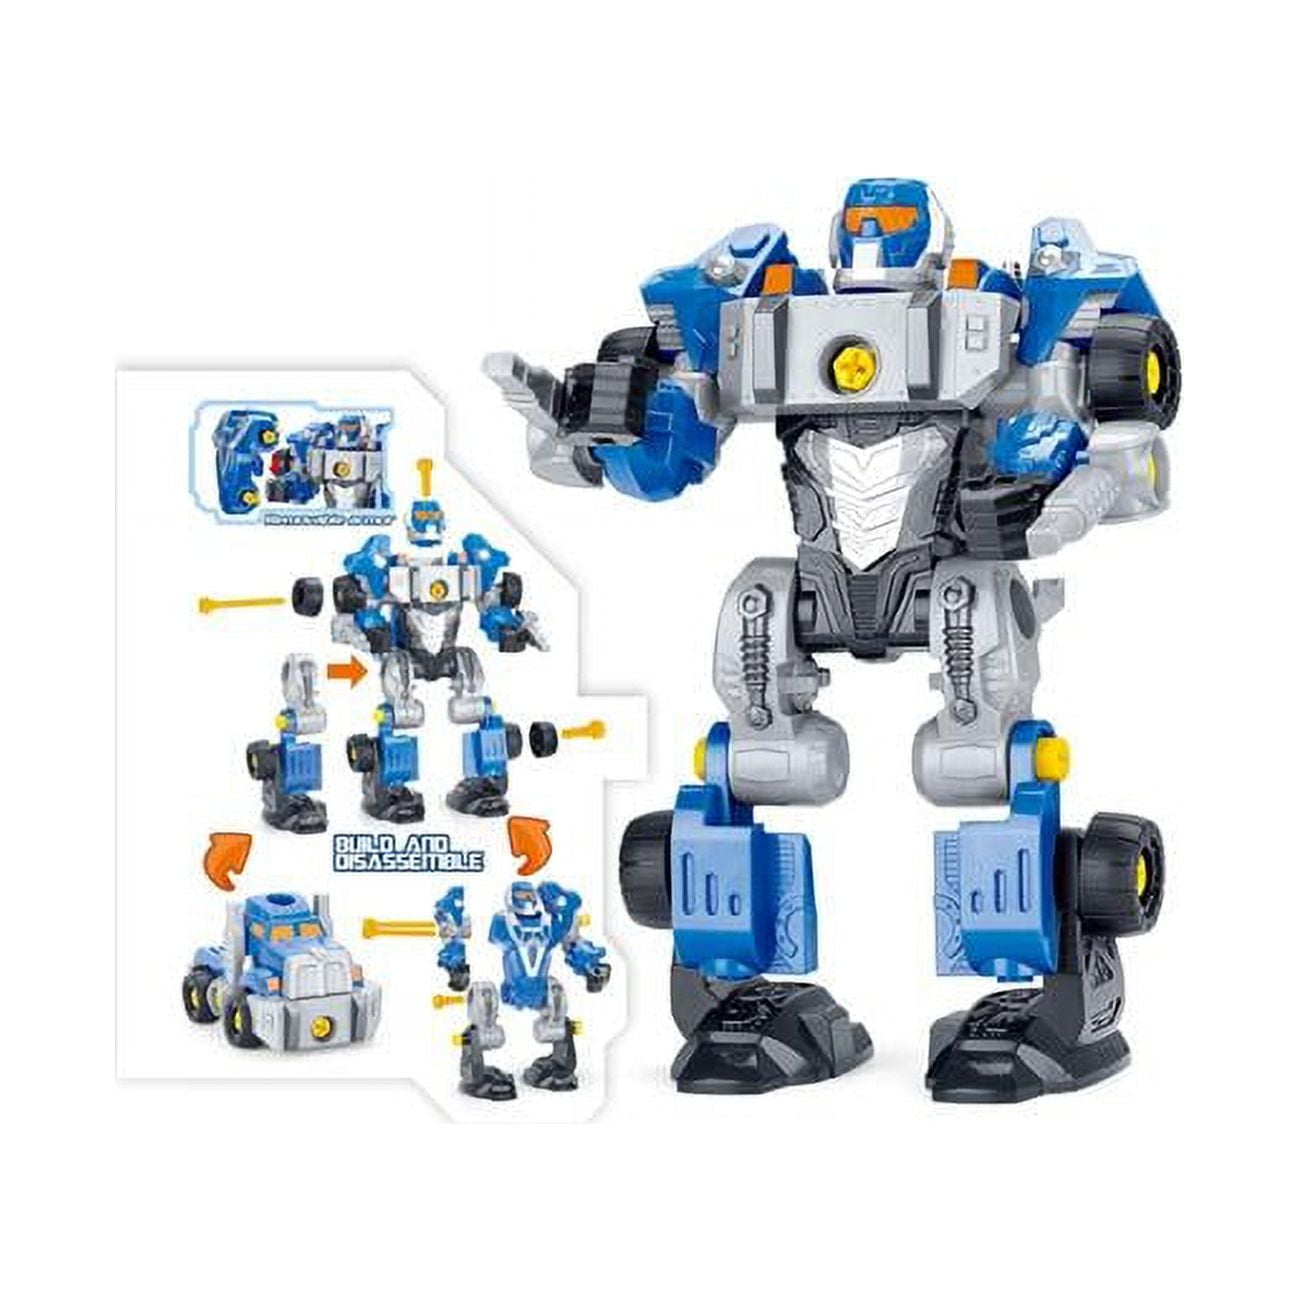 Ps1505 Blue 3-in-1 Toy Robot Playset - 42 Modification Pieces, Electric Play Drill & Screwdriver, Blue